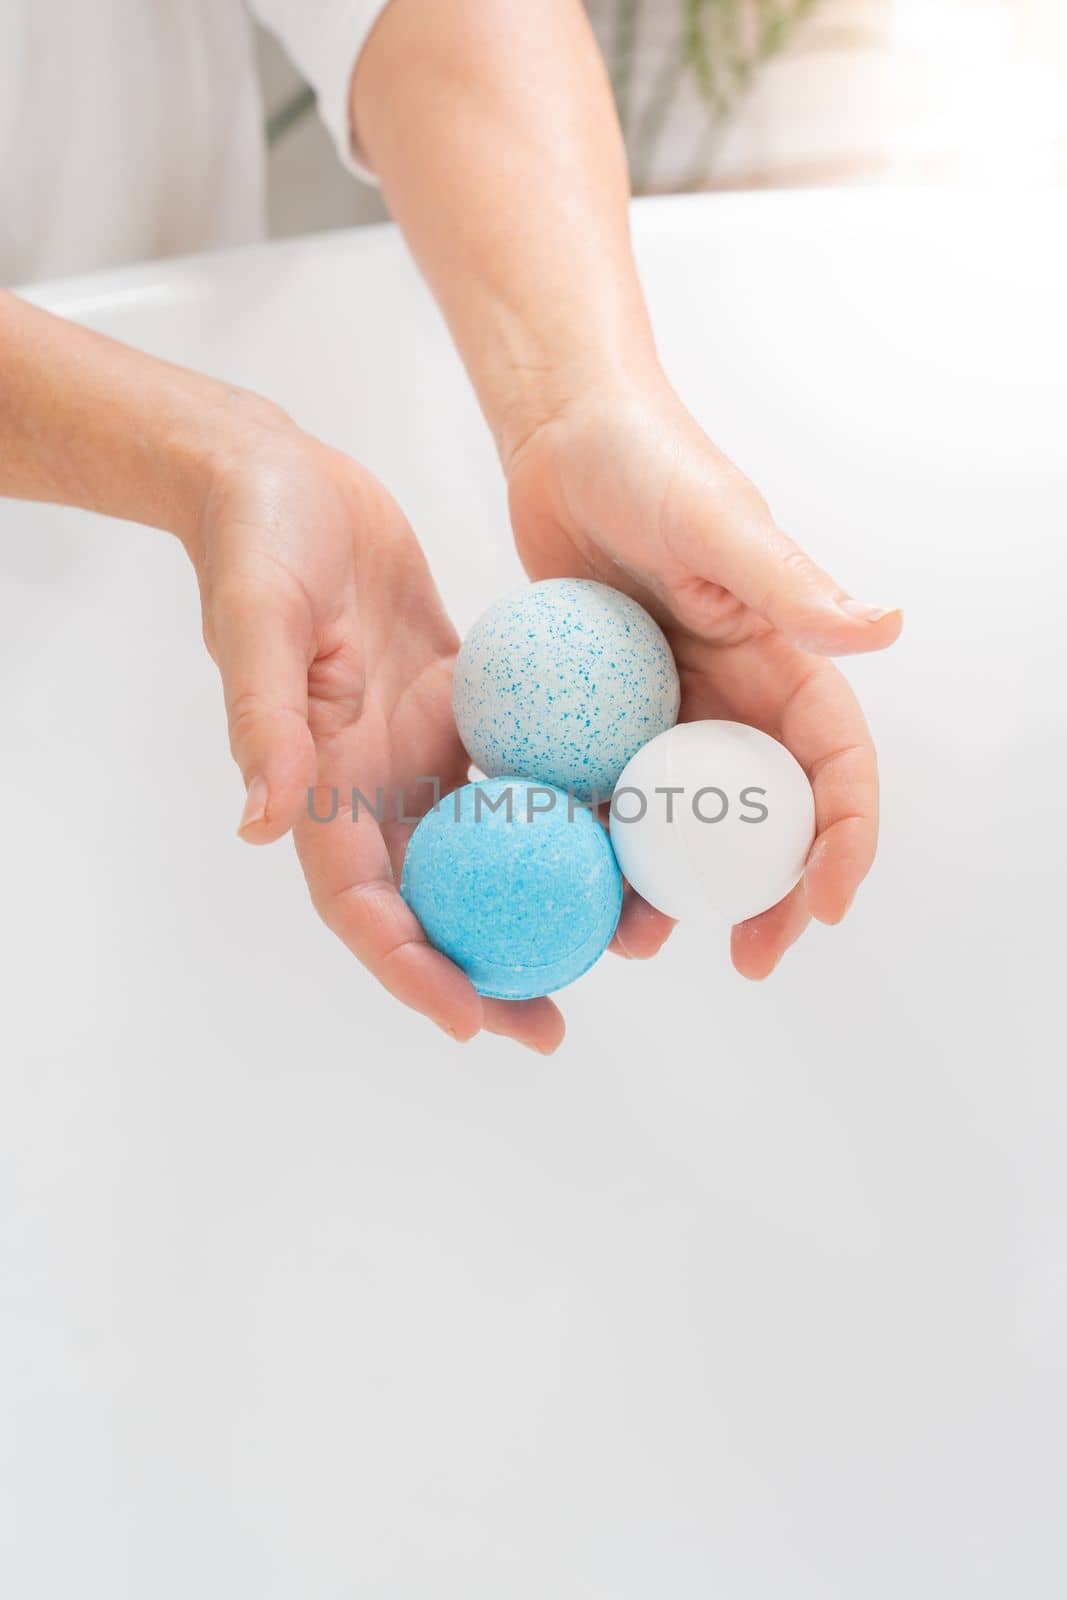 Vertical closeup of a woman's hands putting salt and soap balls in the bathtub for skin body care. by PaulCarr